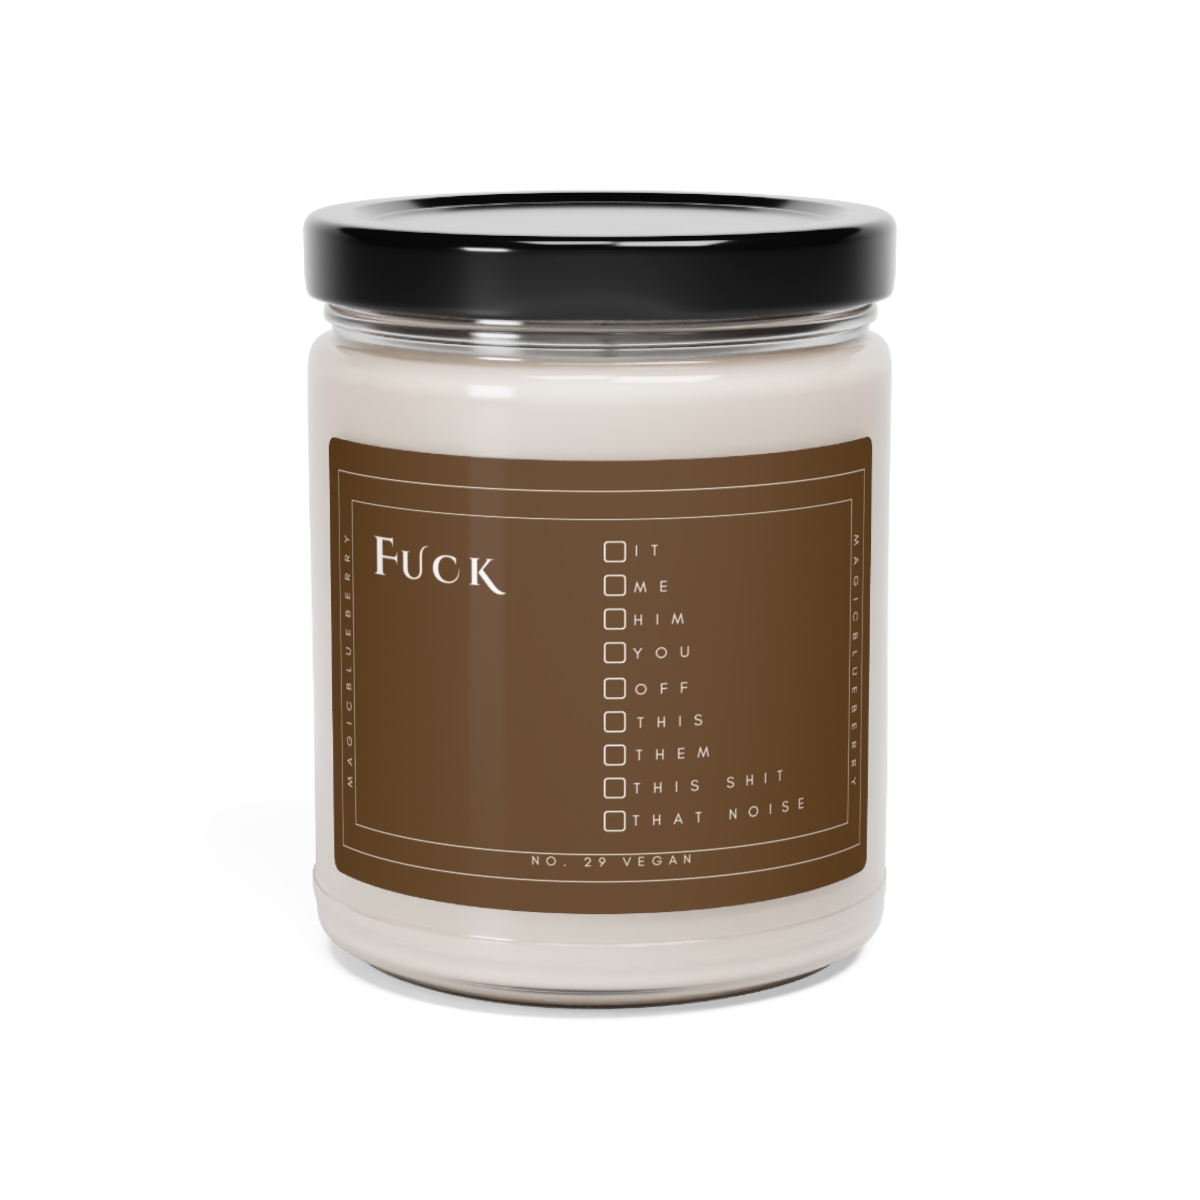 Fuck It - Scented Vegan Soy Wax Candle, Clear Jar Candle, Spell Candle, Sassy Candle, Vegan Candle, Cotton Wick Candle, Home Decor product thumbnail image